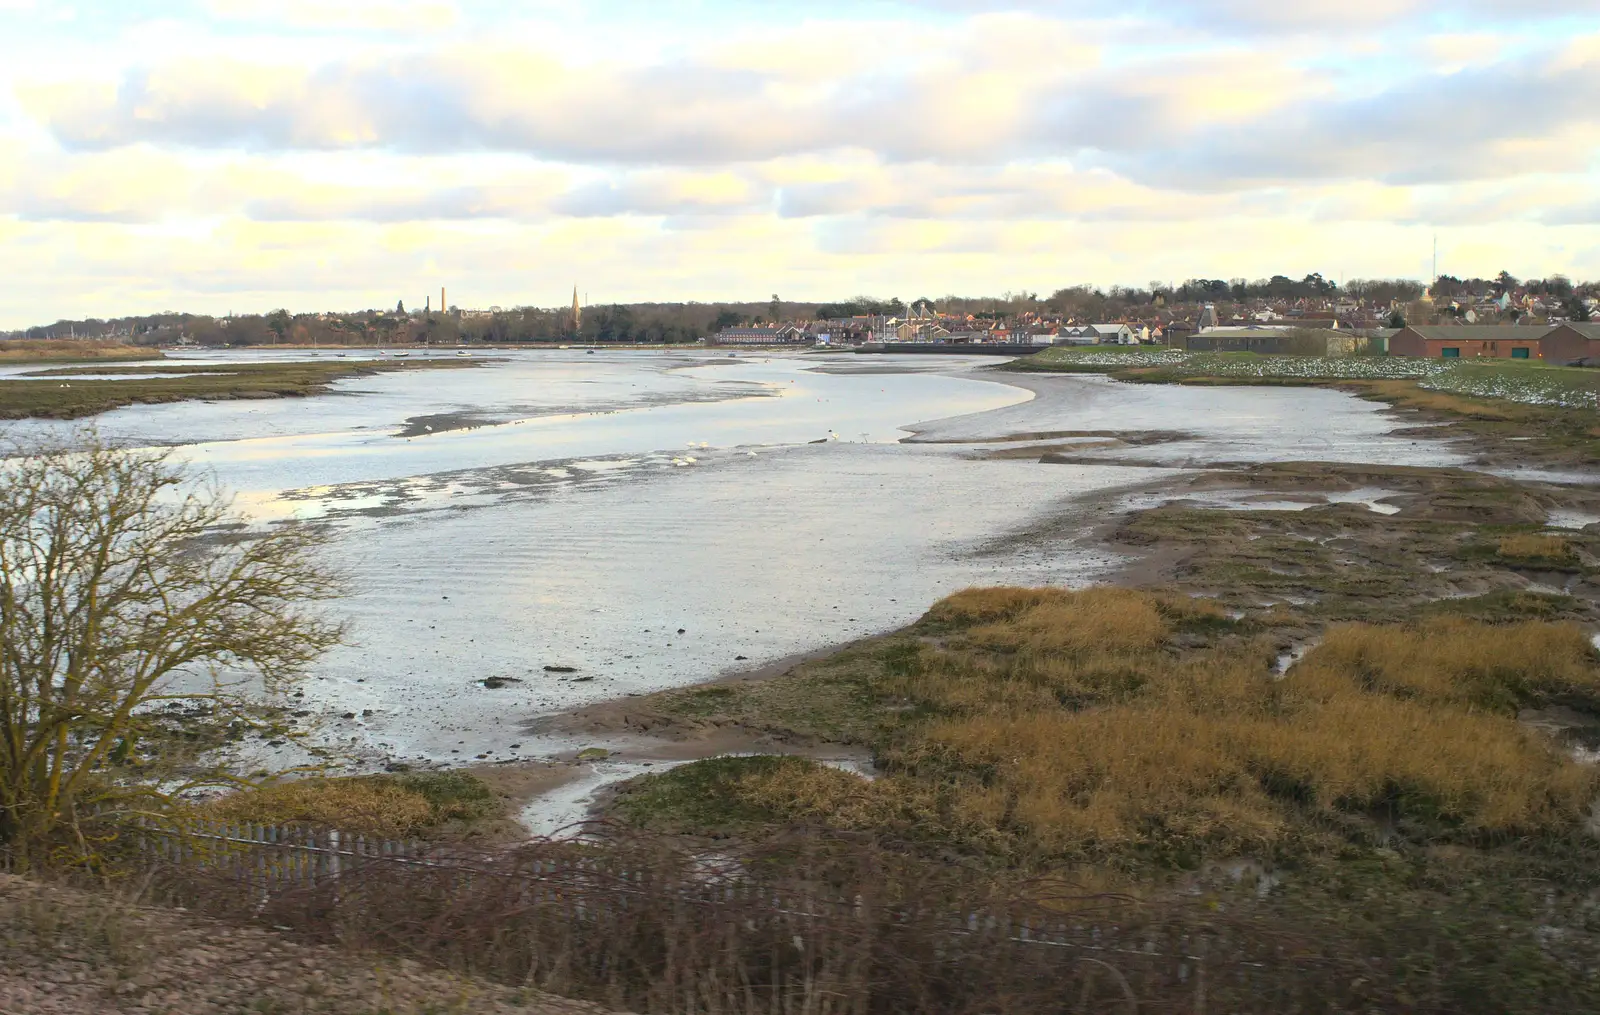 A view towards Manningtree, from Bramford Dereliction and Marconi Demolition, Chelmsford - 12th March 2013